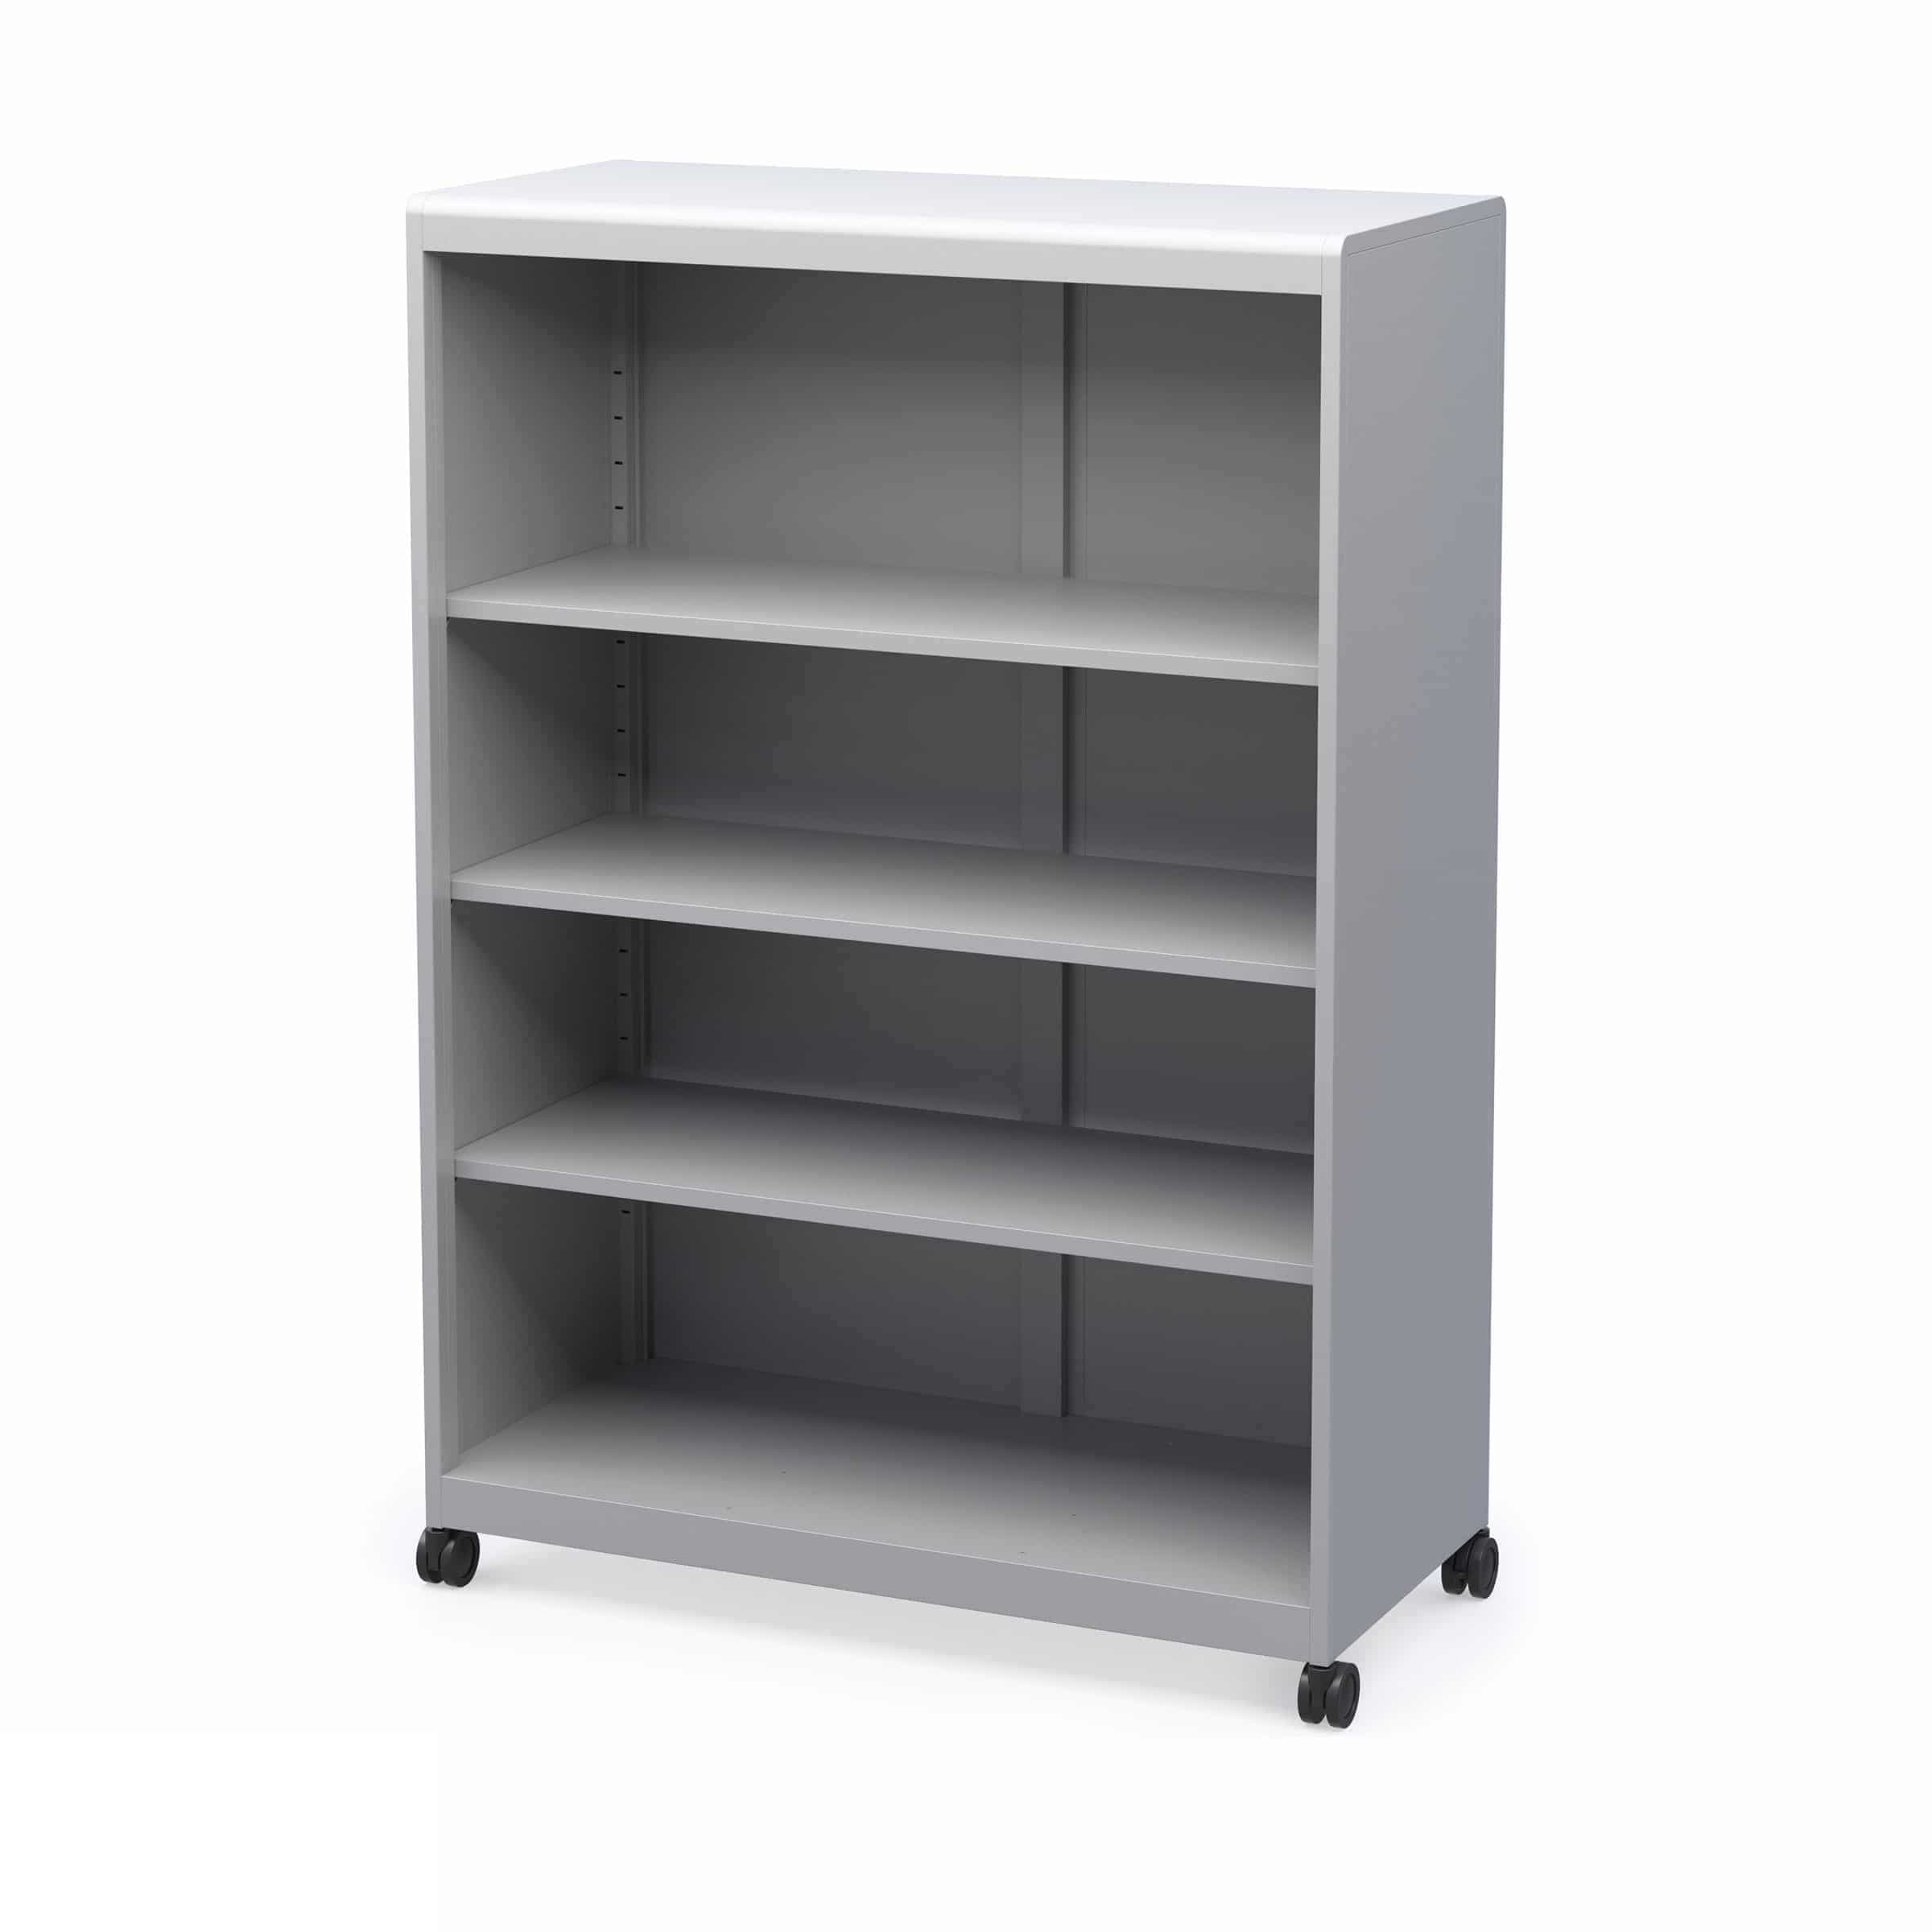 Voyager Tall Storage Cart with Shelves - Three Quarter View